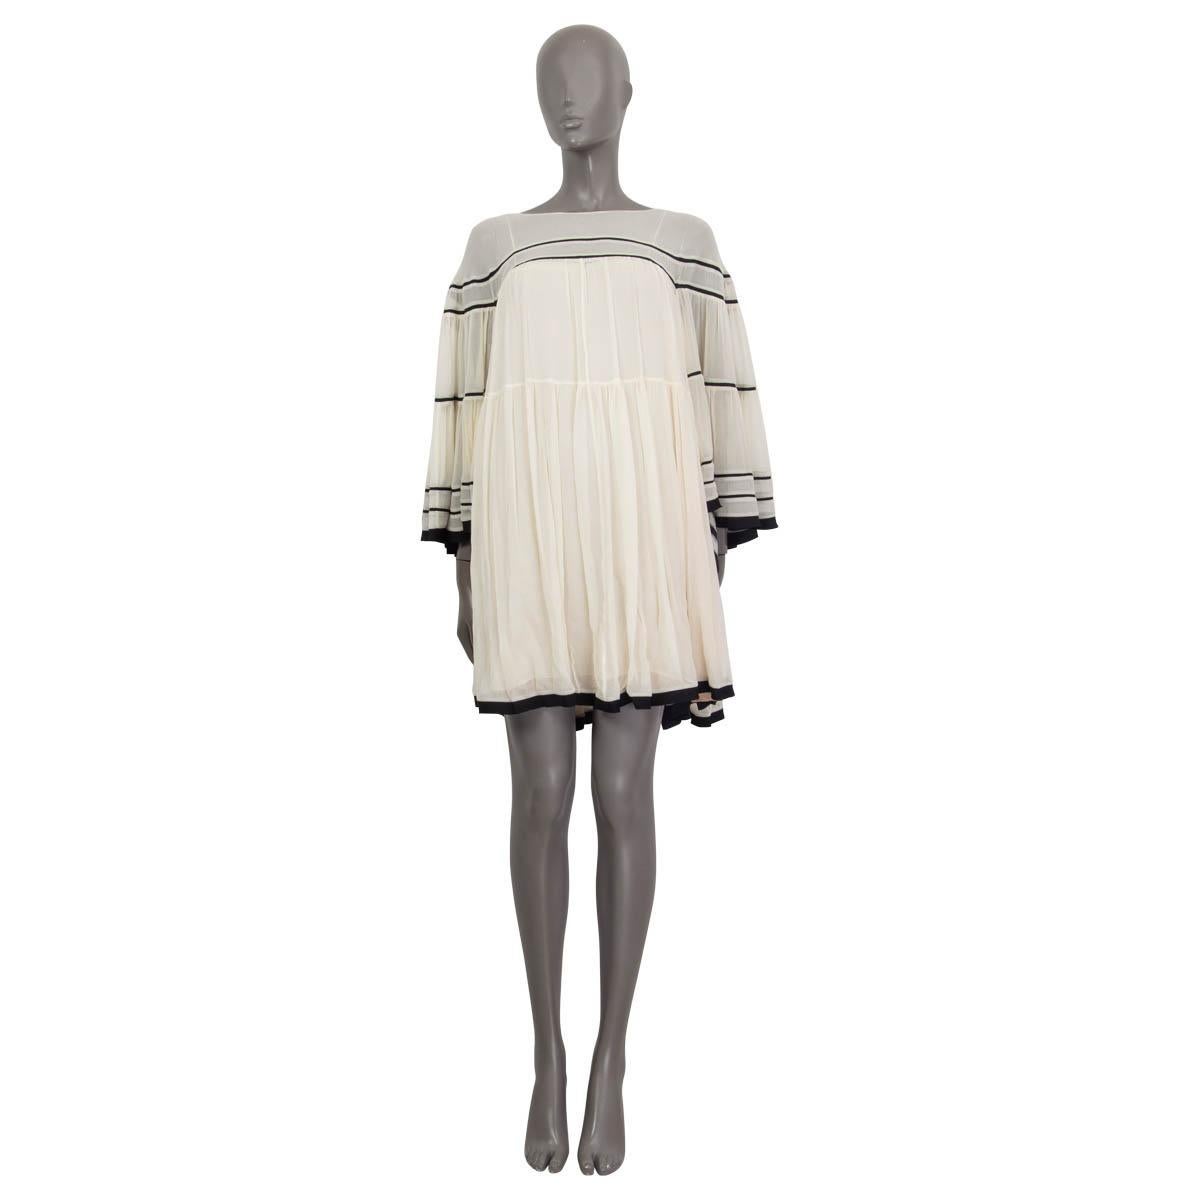 100% authentic Chloe striped dress in ivory and black silk (100%). Features a flared fit and flared sleeves. Comes with a nude slip dress in nude silk (100%). Has some faint stains at the sleeves otherwise in excellent condition. 

Measurements
Tag